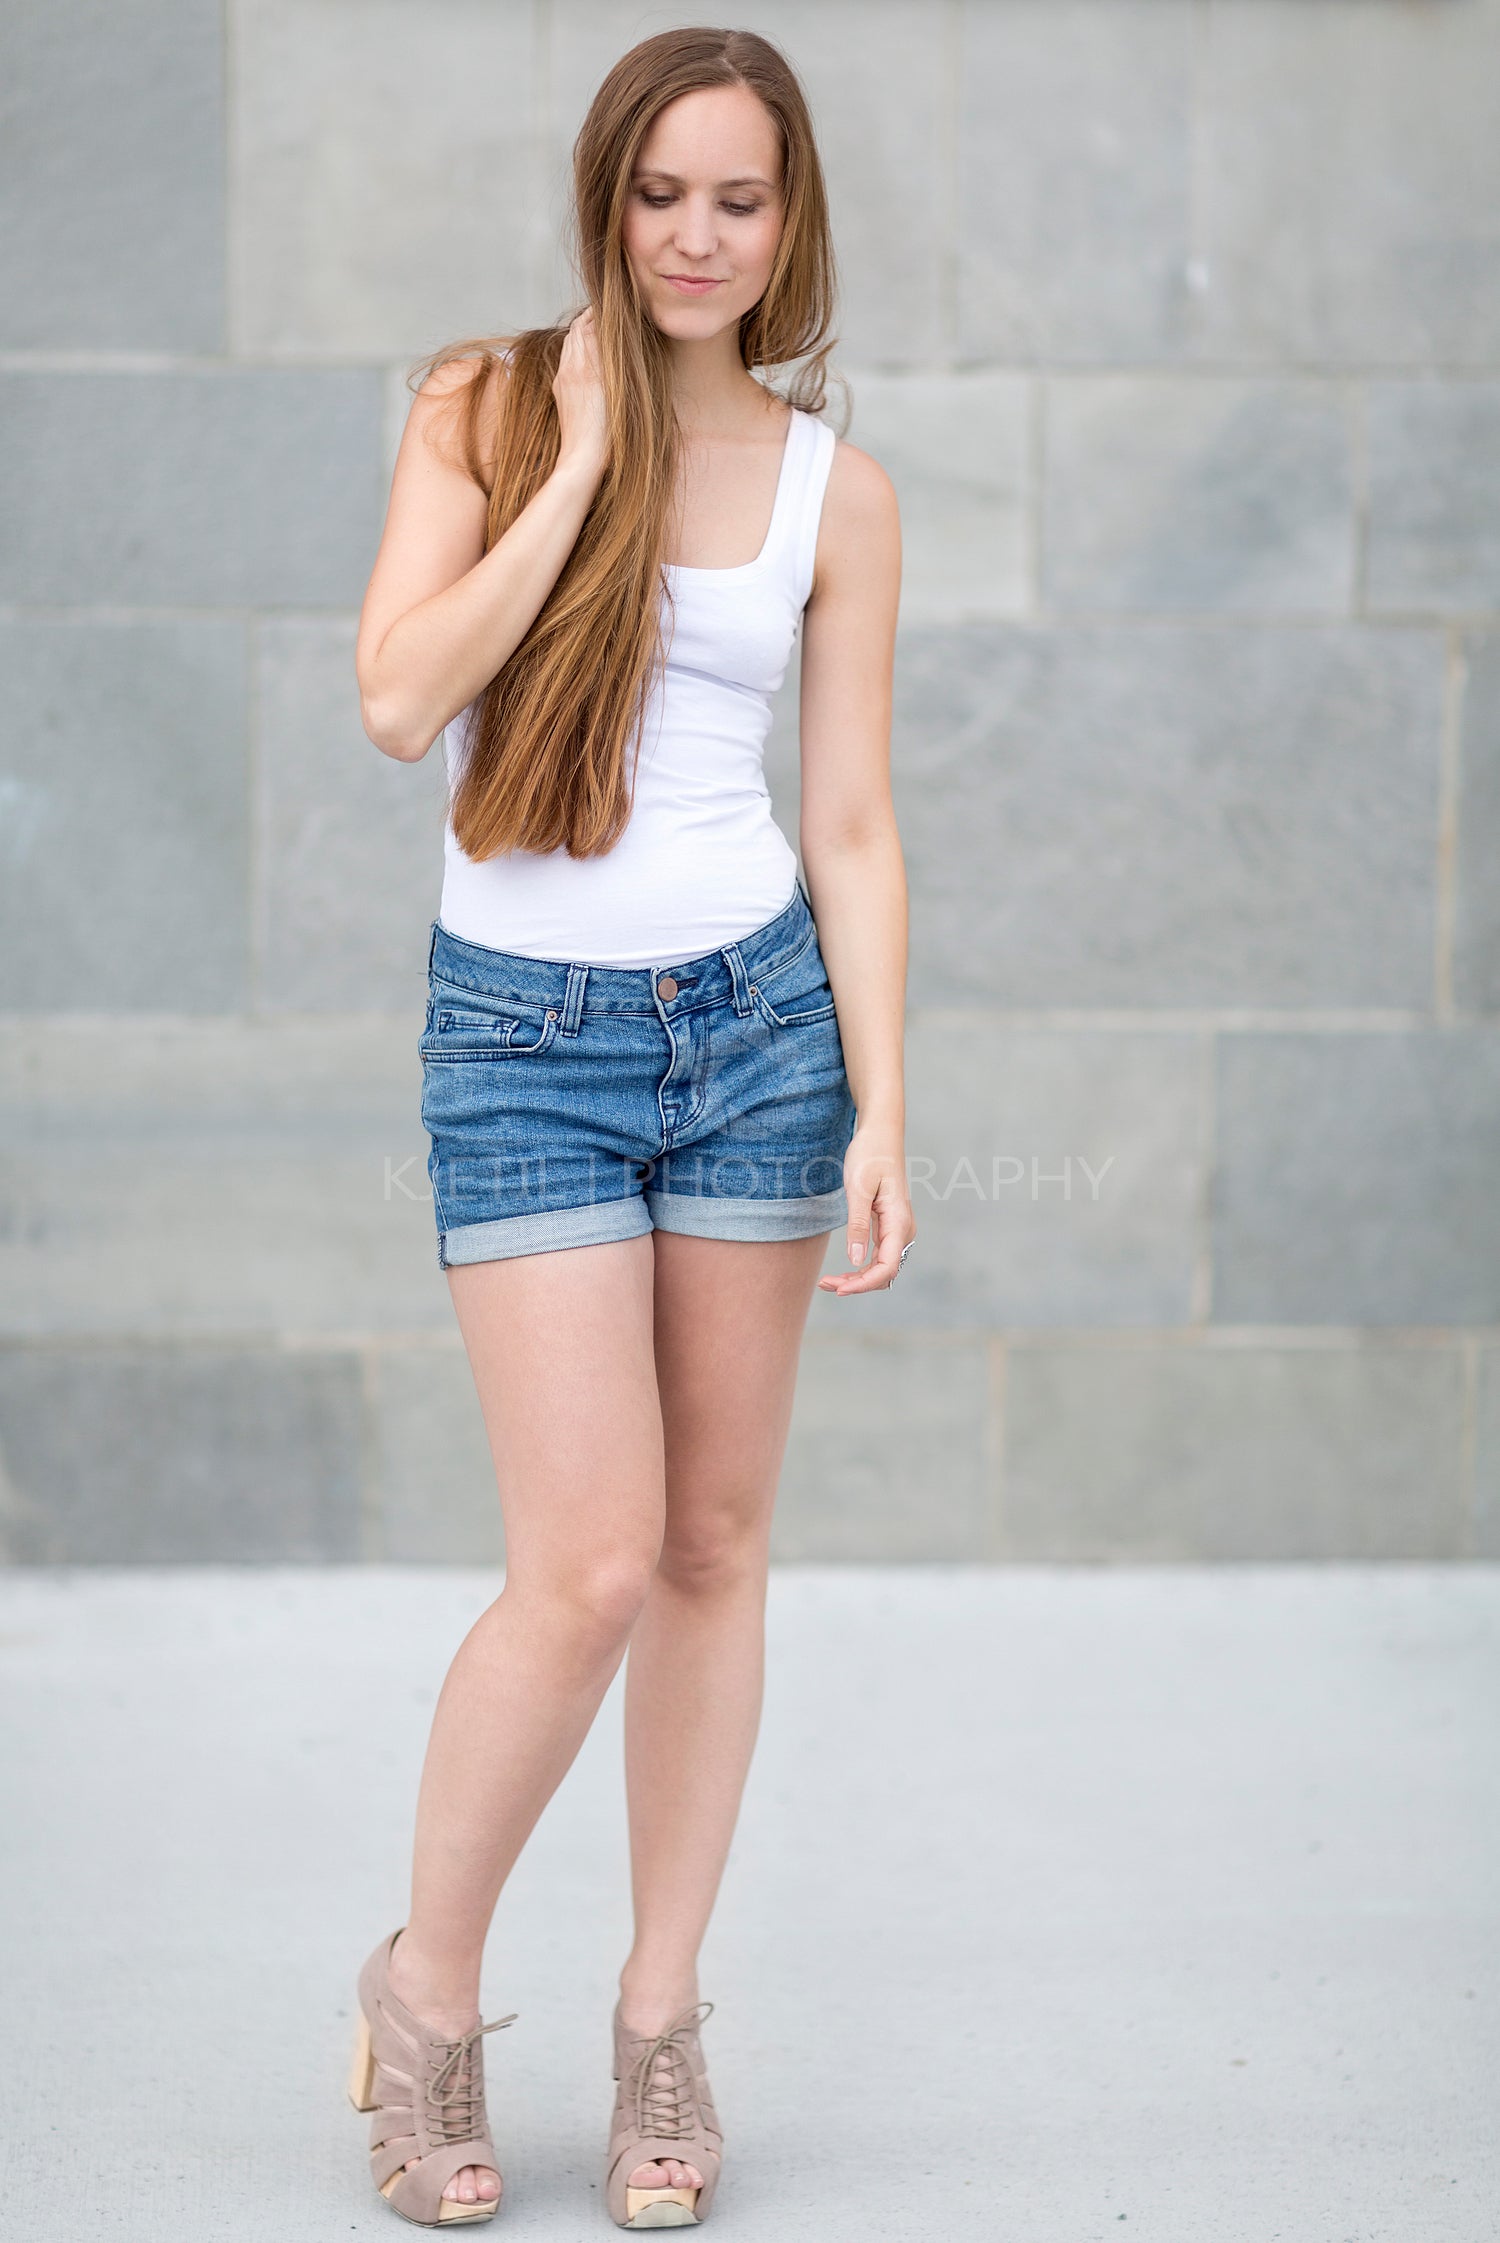 Beautiful and smiling nordic woman in shorts